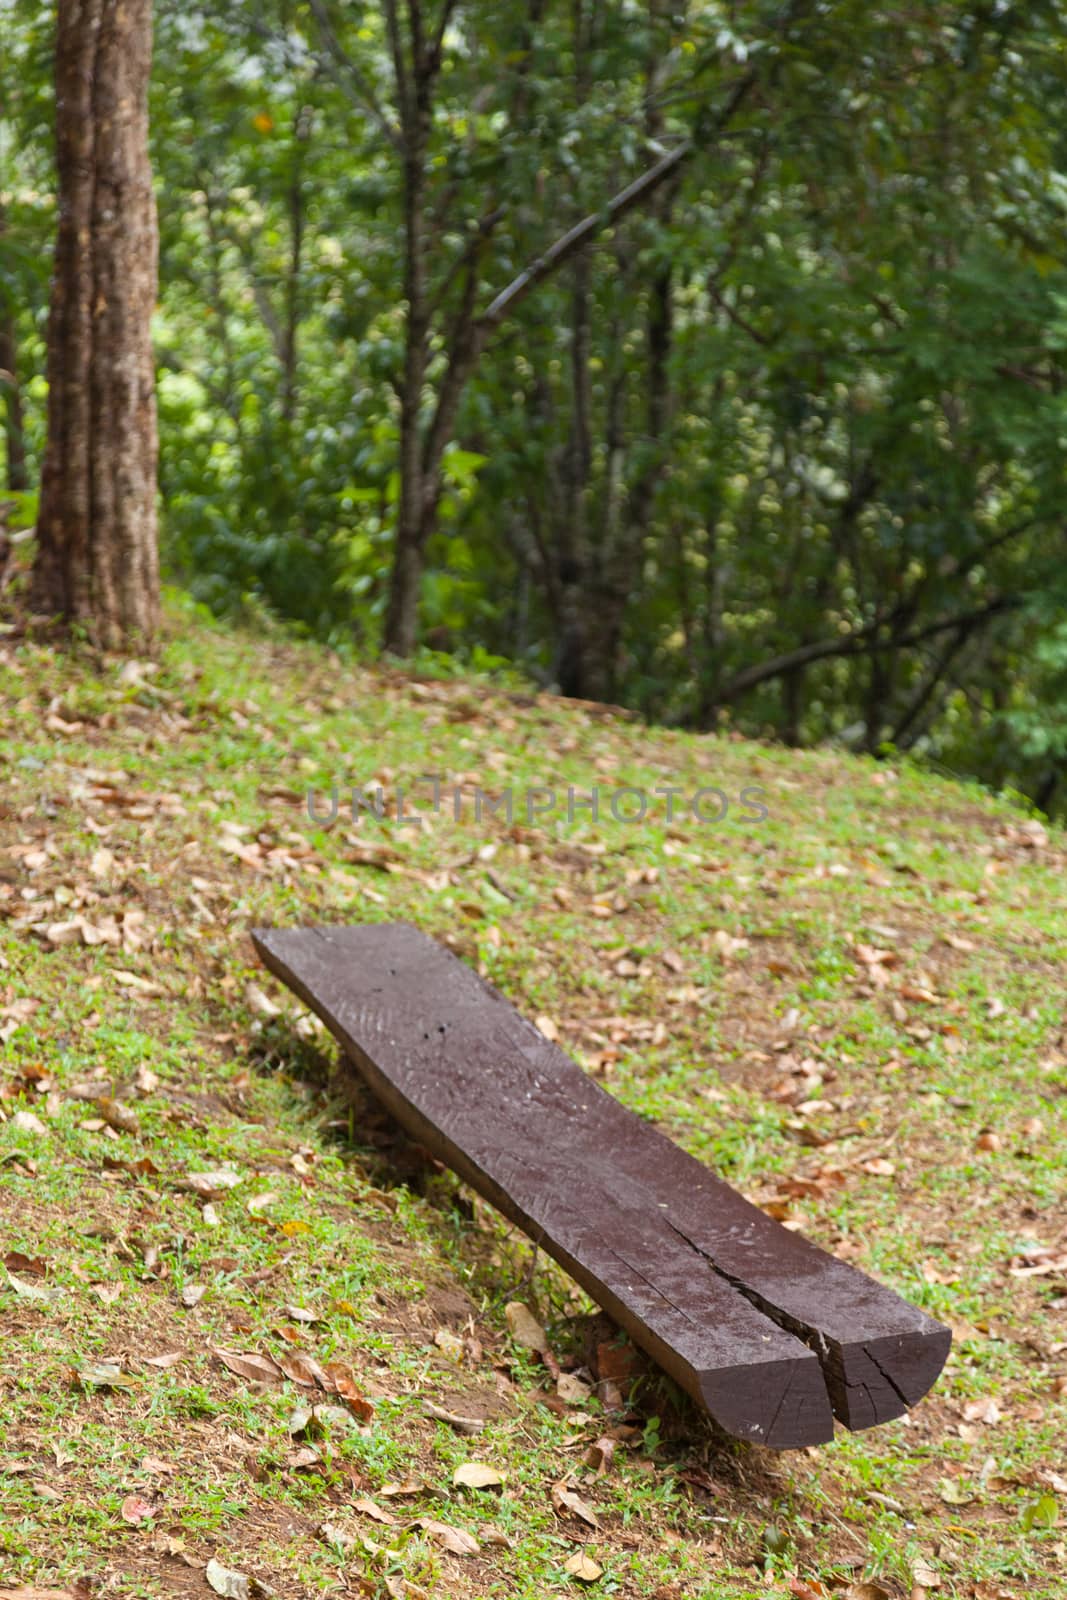 bench is made of wood. On the lawn under the trees